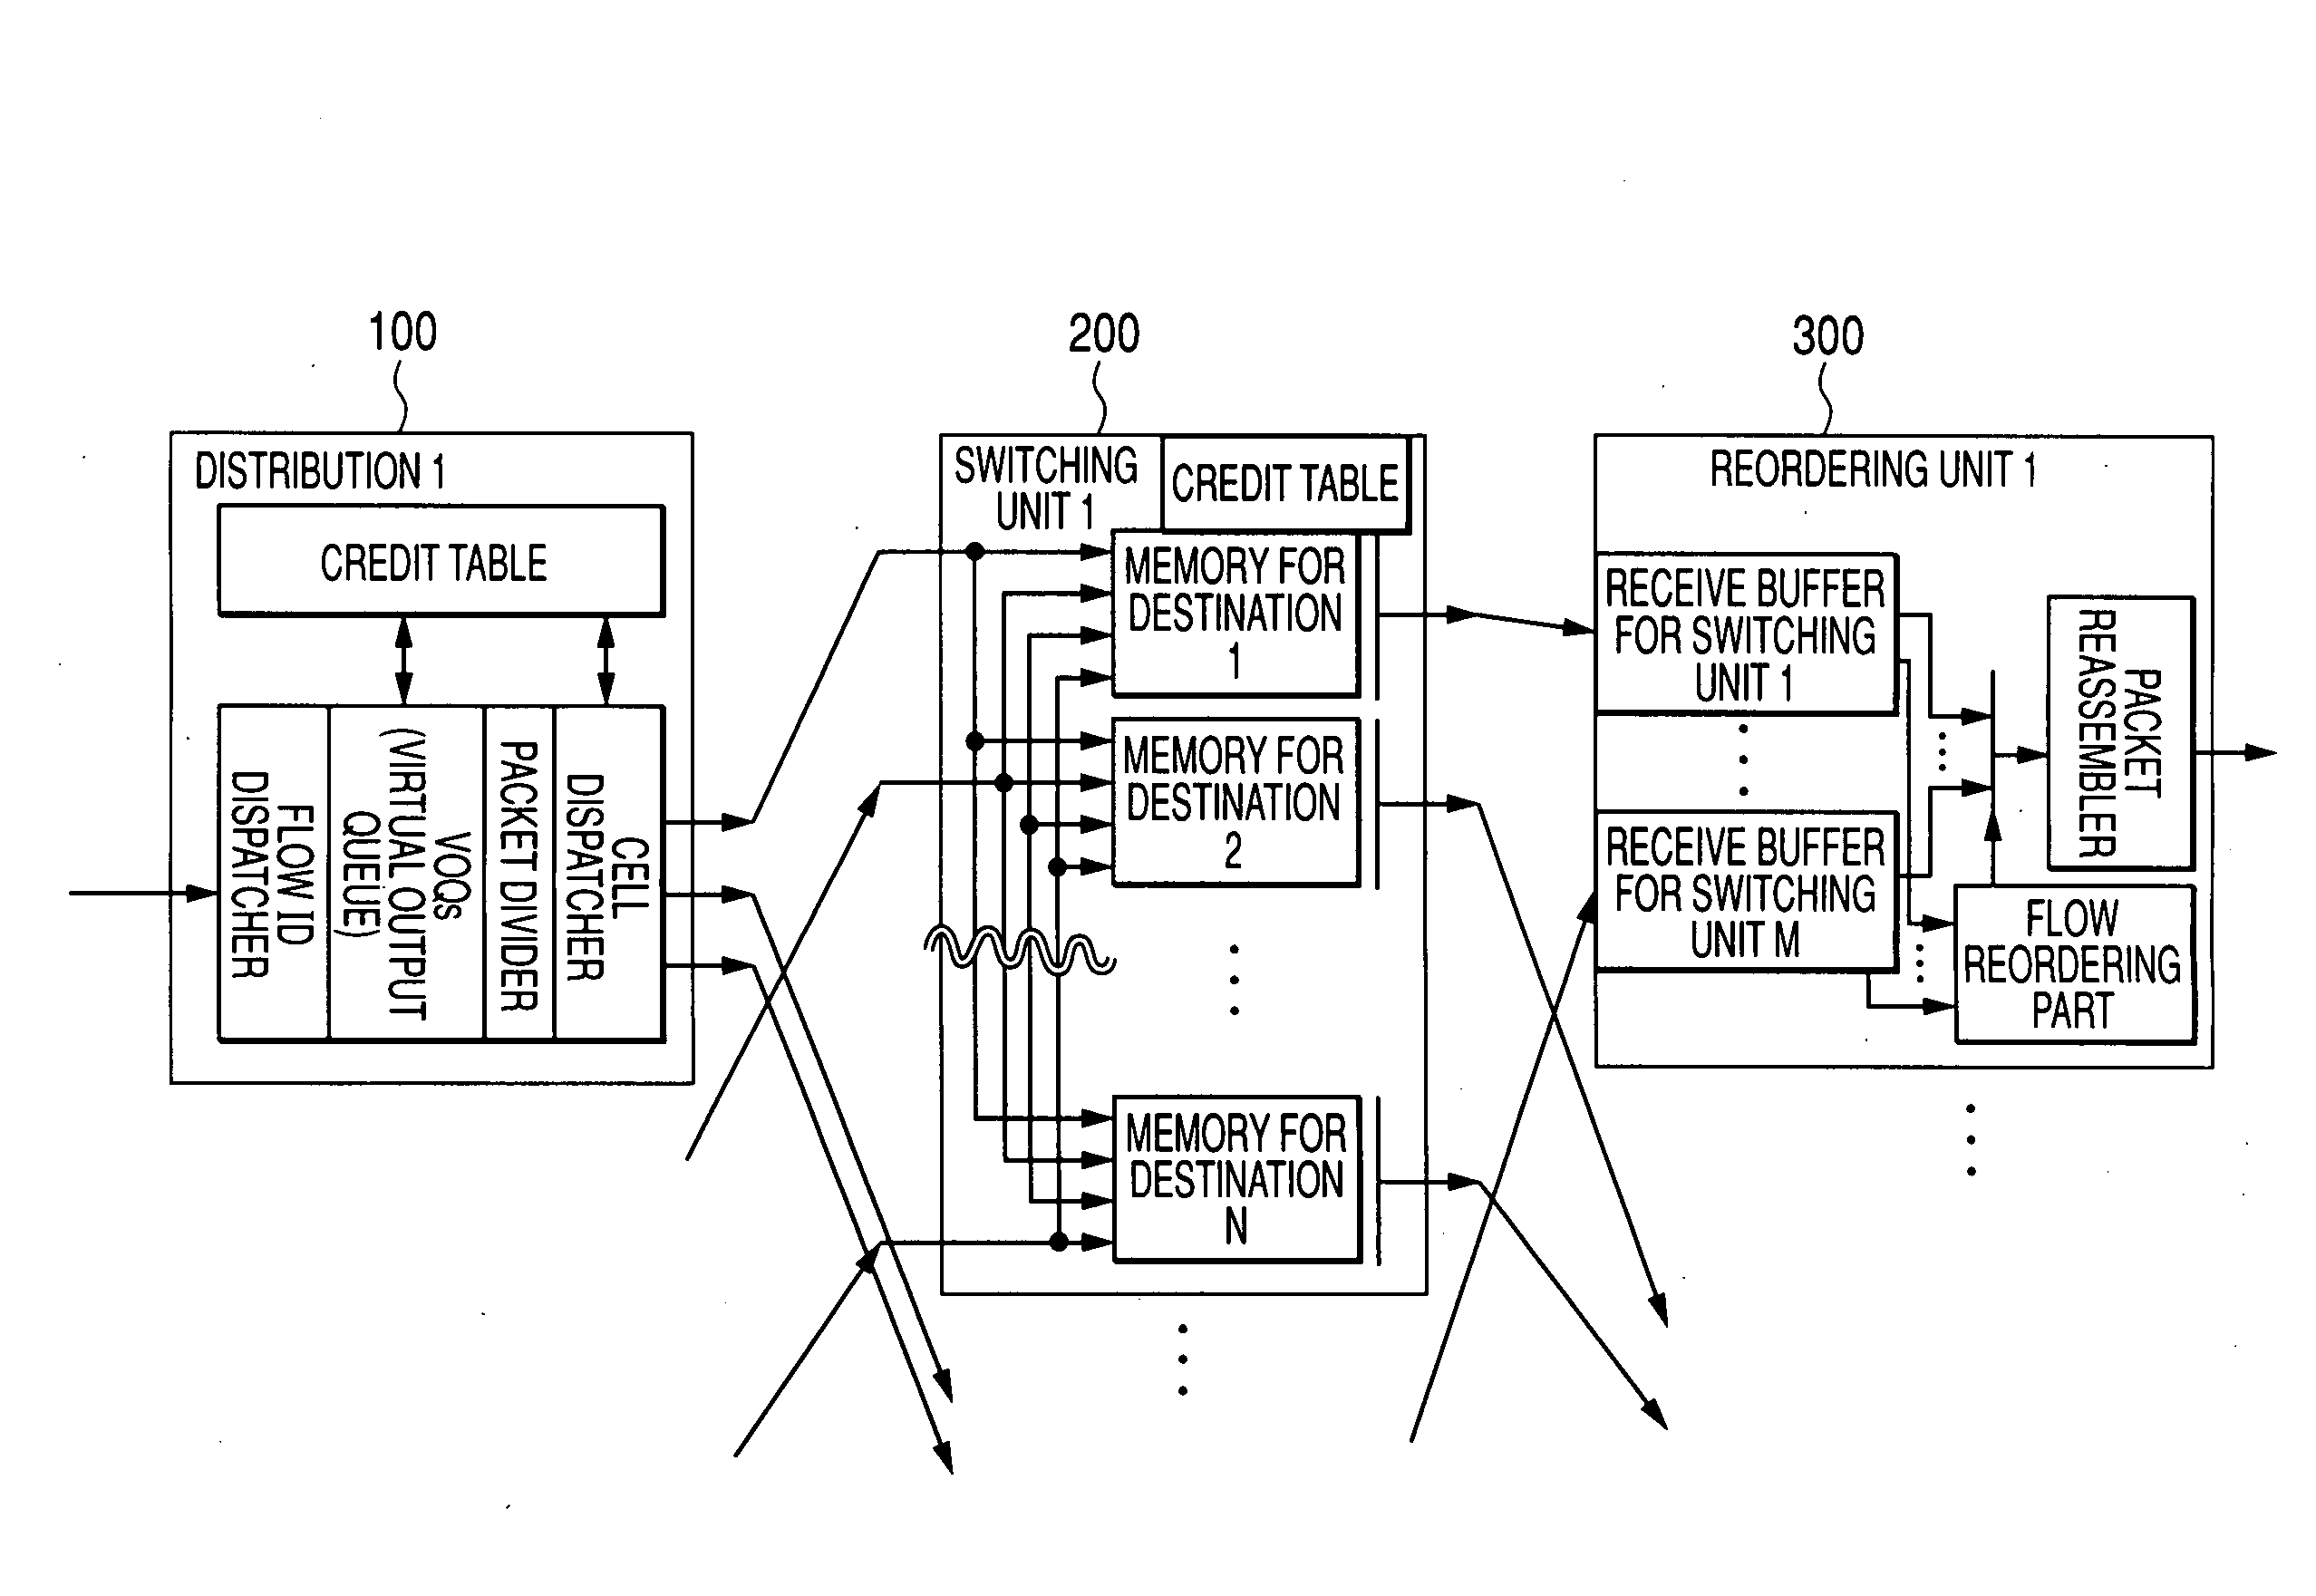 Multi-plane cell switch fabric system